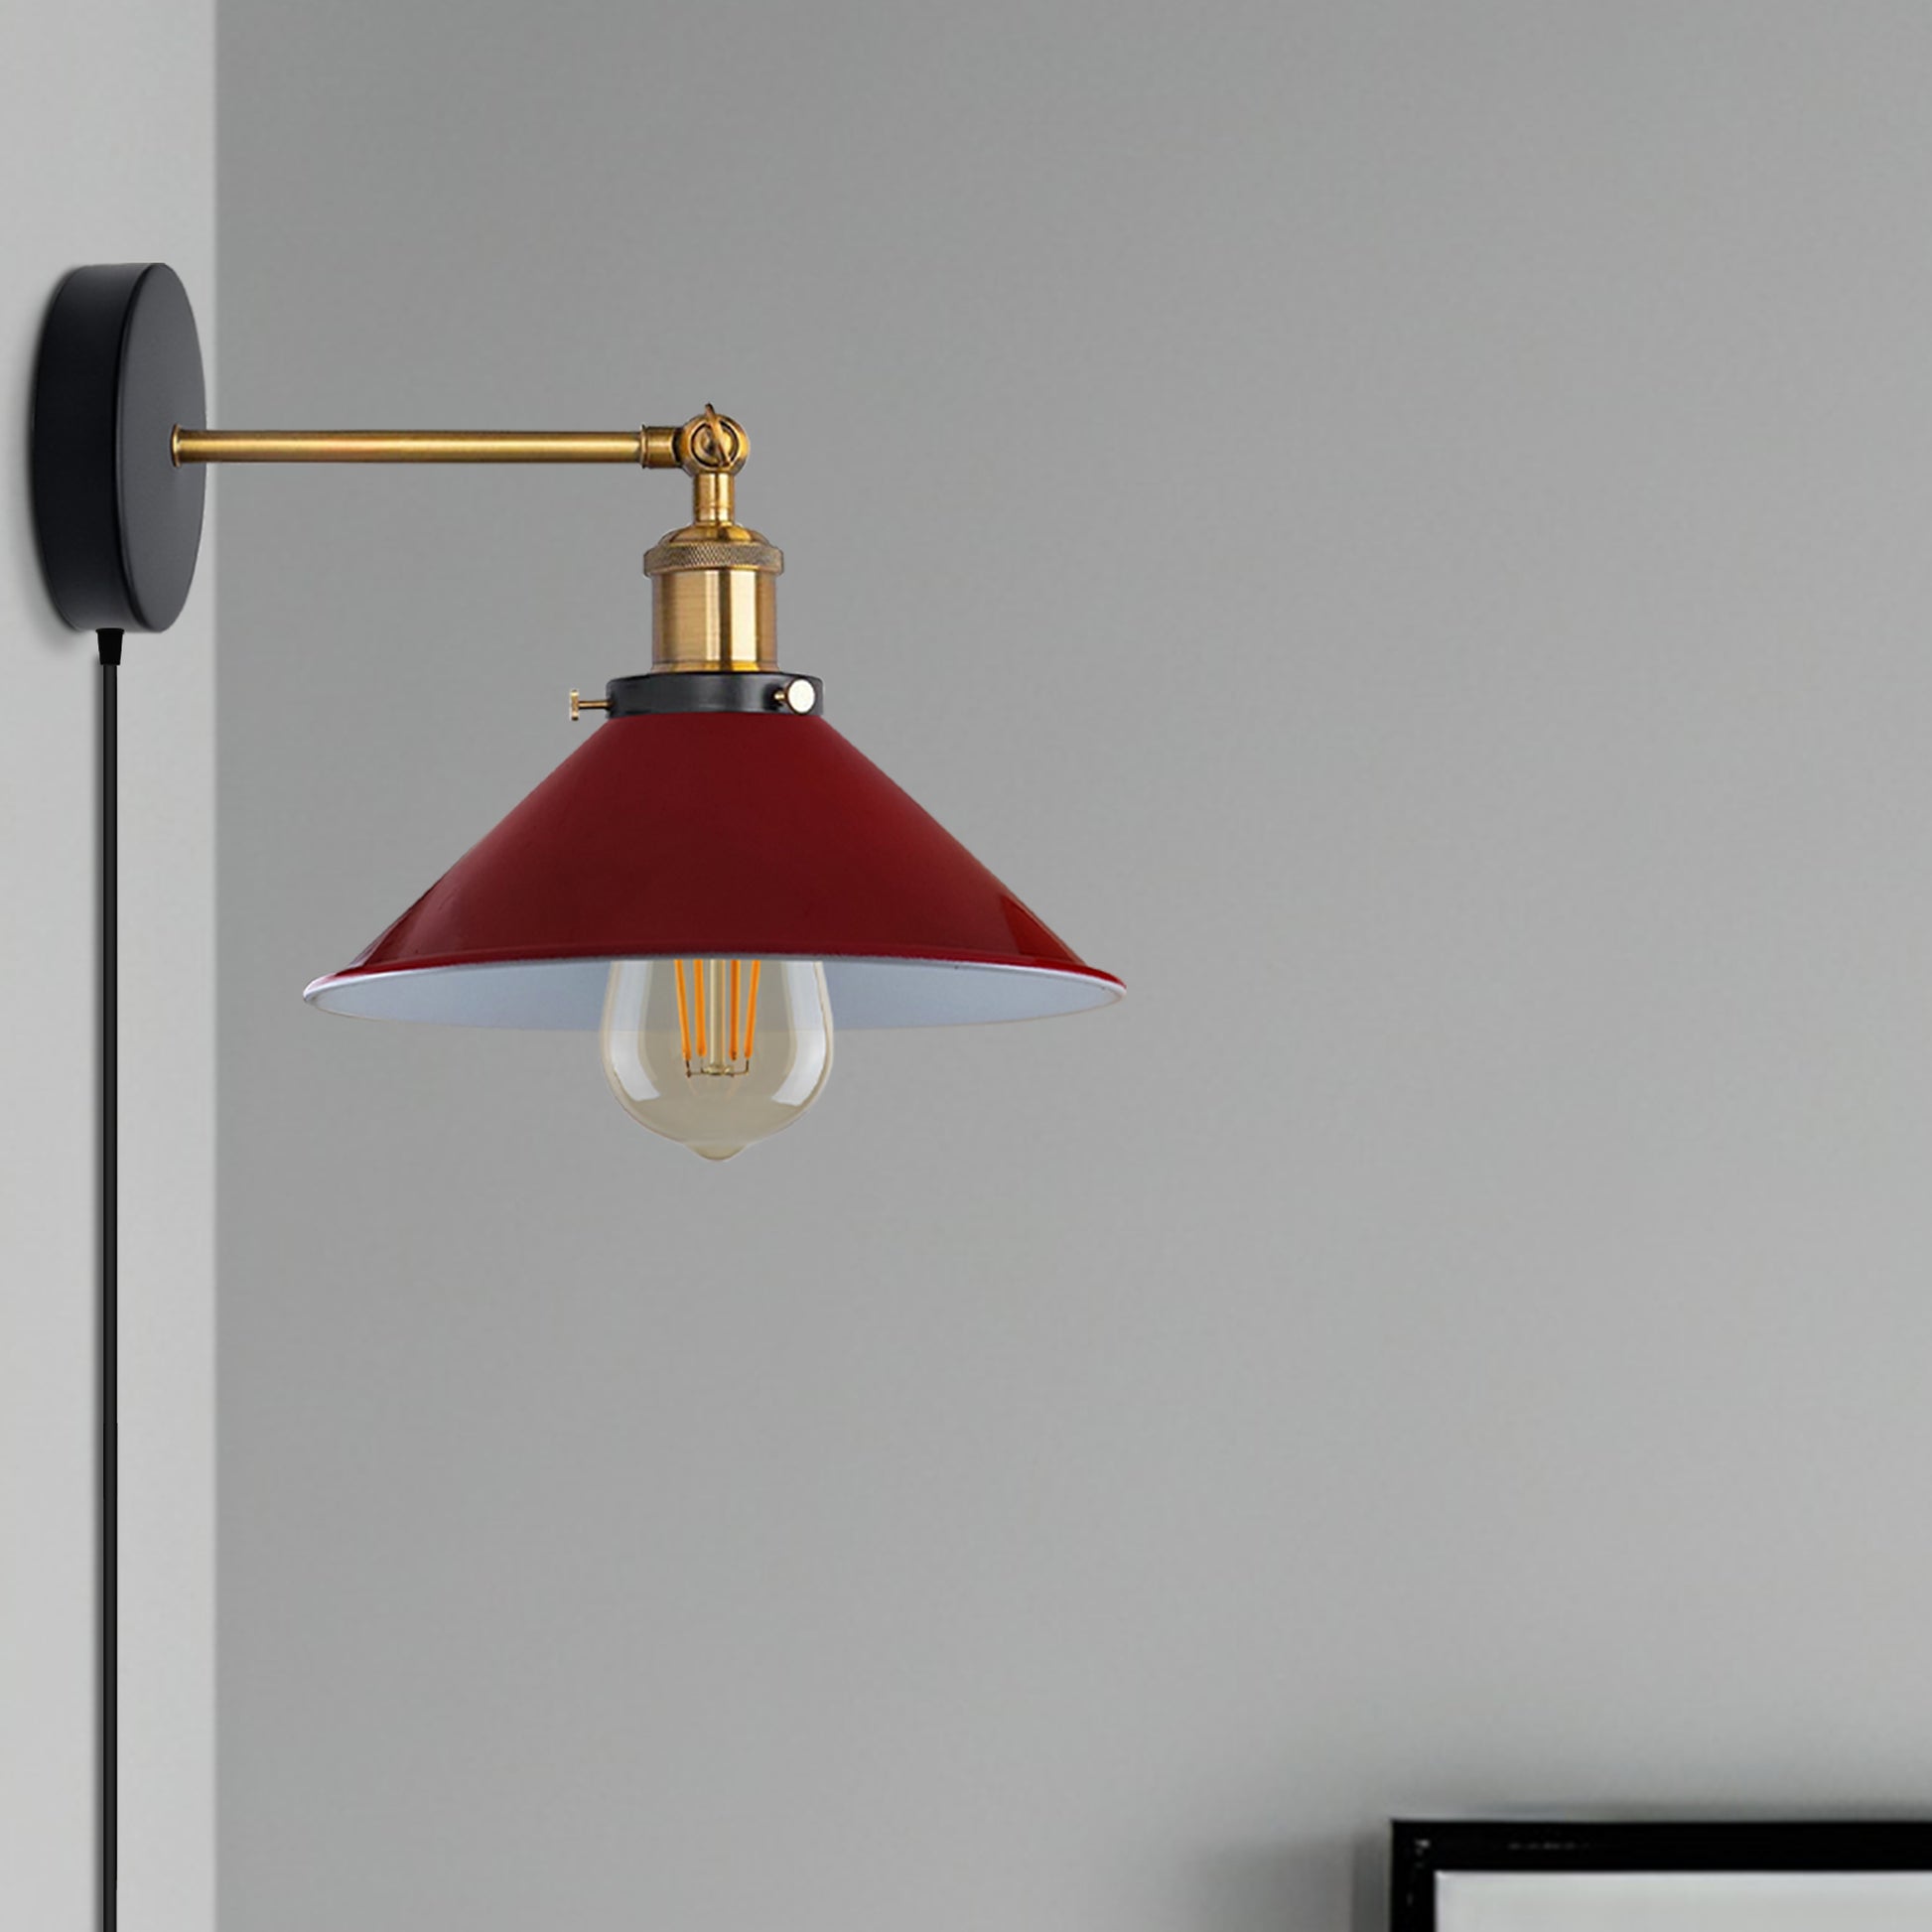 Red Plug-in Wall Light Sconces with Dimmer Switch for bed room.JPG